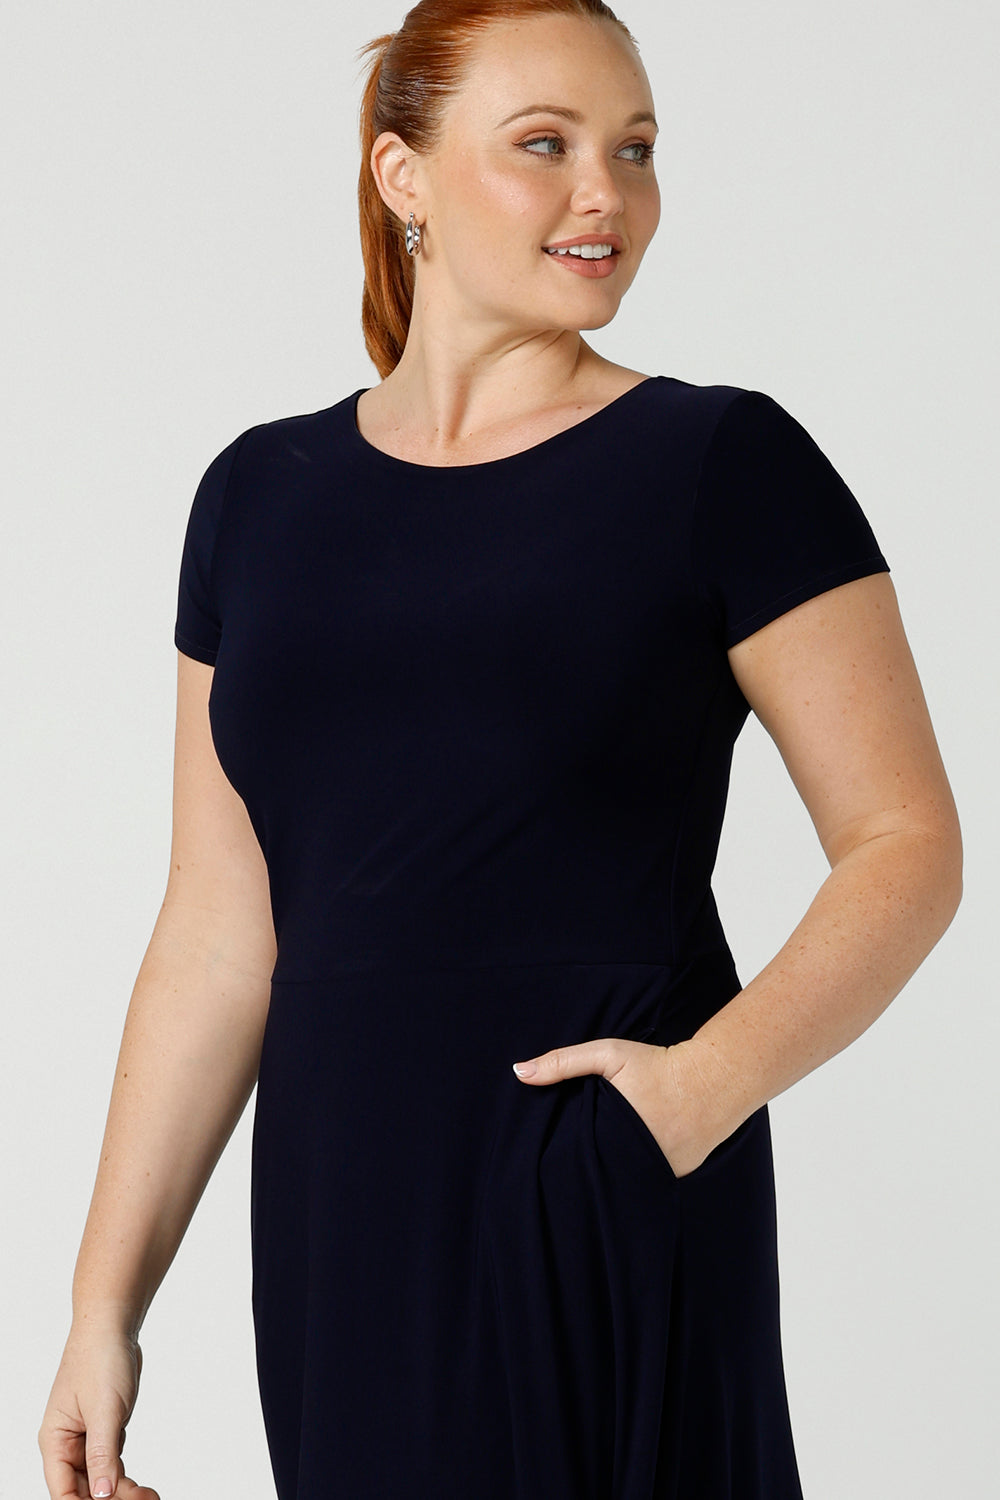 If you're looking for dresses made in Australia, look to this elegant navy dress. Showing a close up of the high neck, pockets and short sleeves of a navy blue  dress with flared skirt and ruffle hemline, this is a good workwear dress as well as a classic cocktail dress. With a midi-length skirt, shop this dress in plus sizes as well as petite thanks to made-in-Australia women's clothing brand, Lena & Fleur.